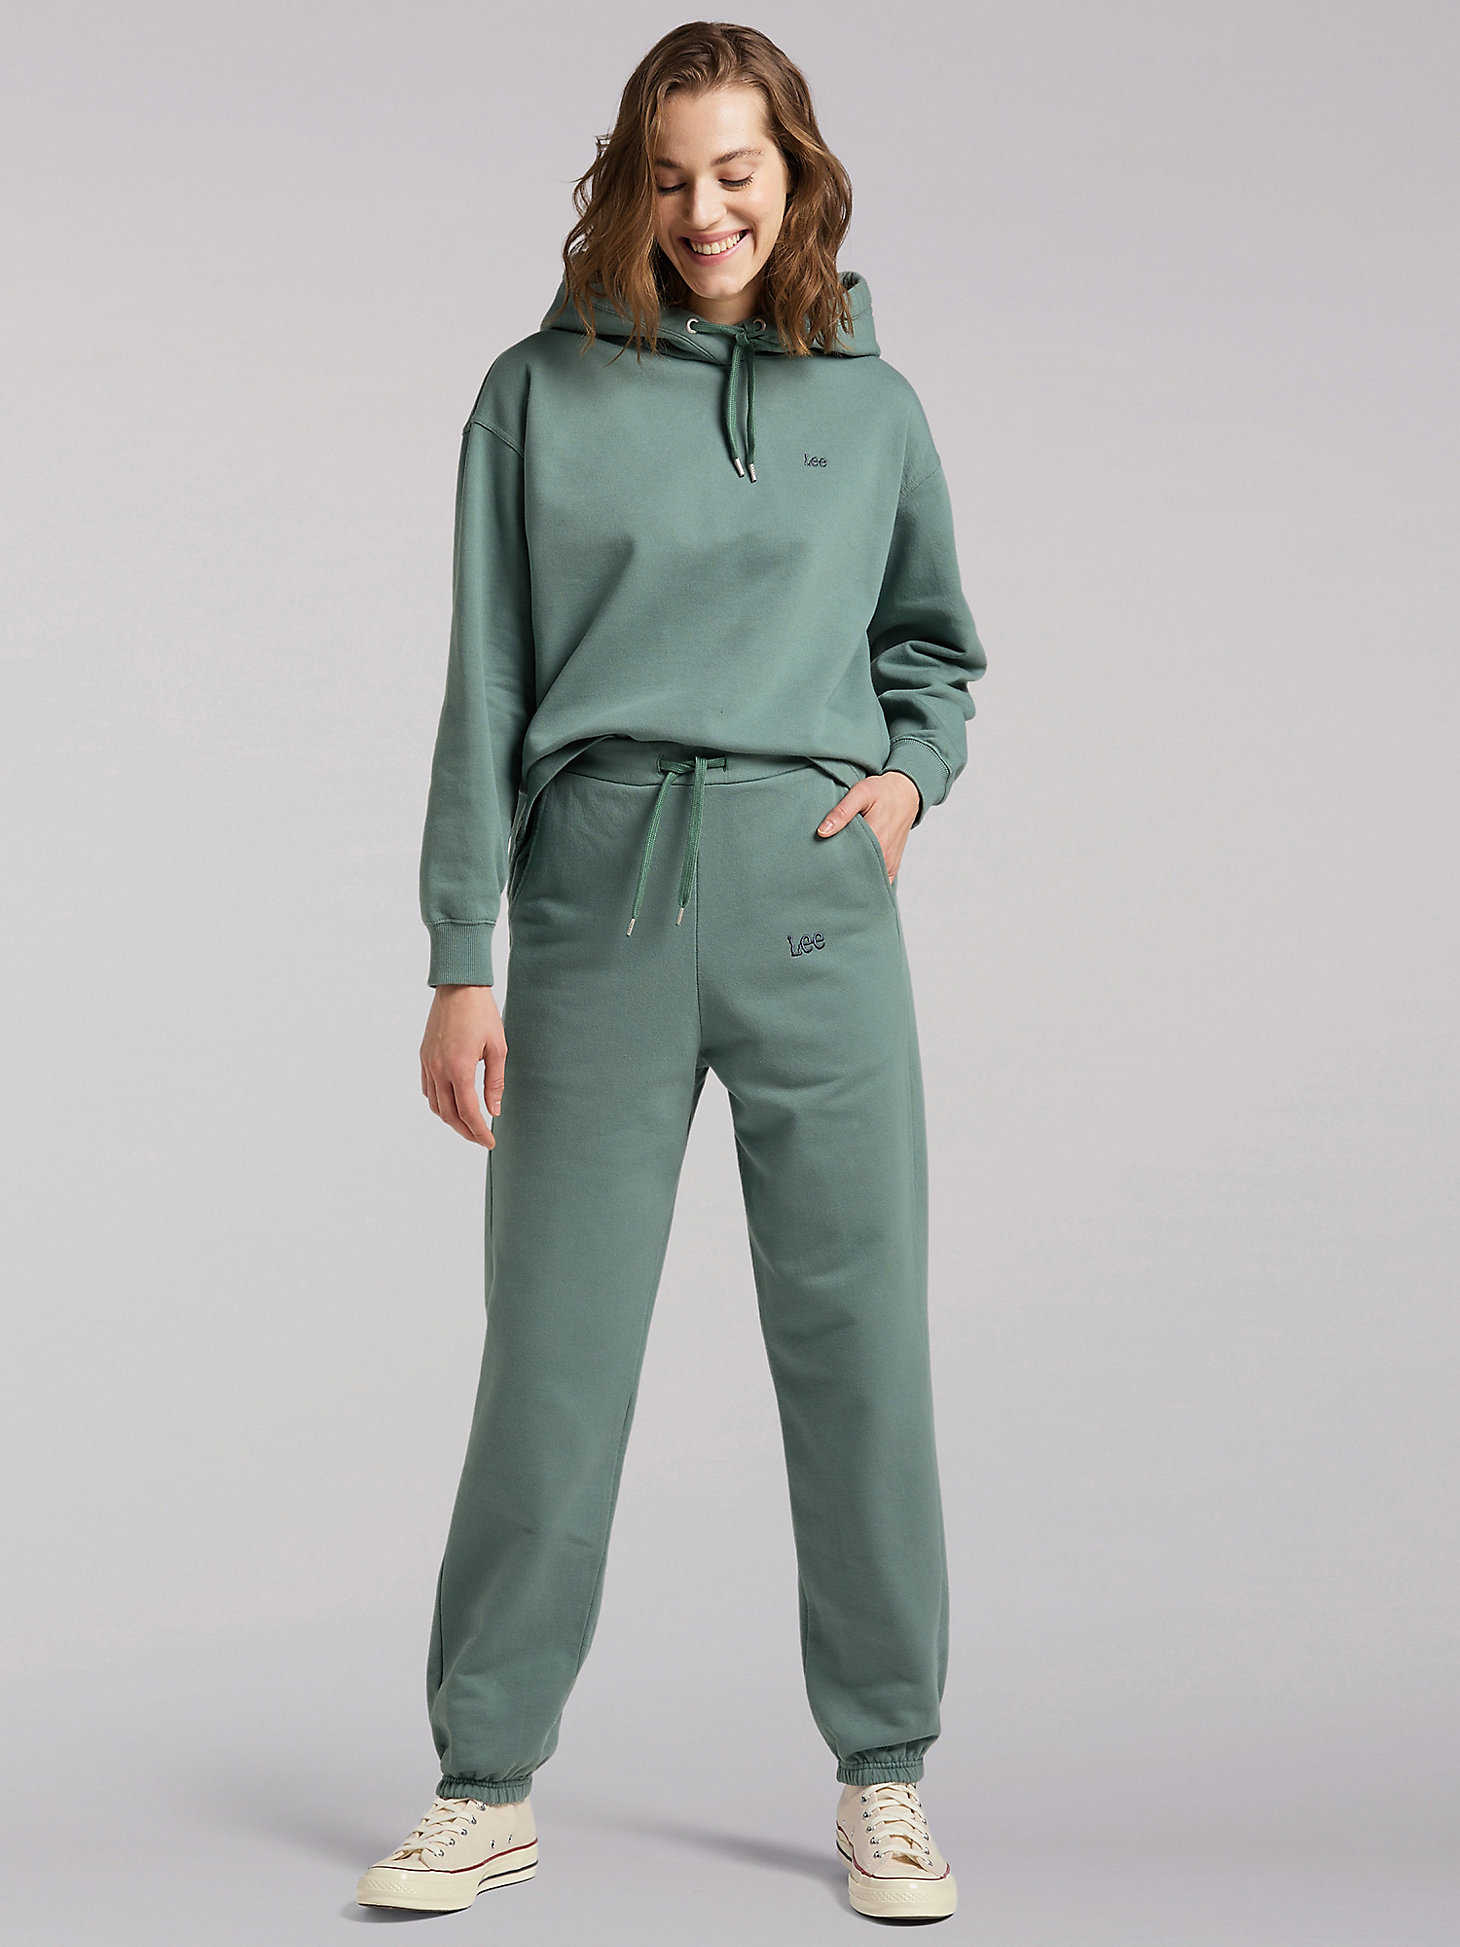 Women's Lee European Collection High Rise Relaxed Sweatpant in Steel Green alternative view 1